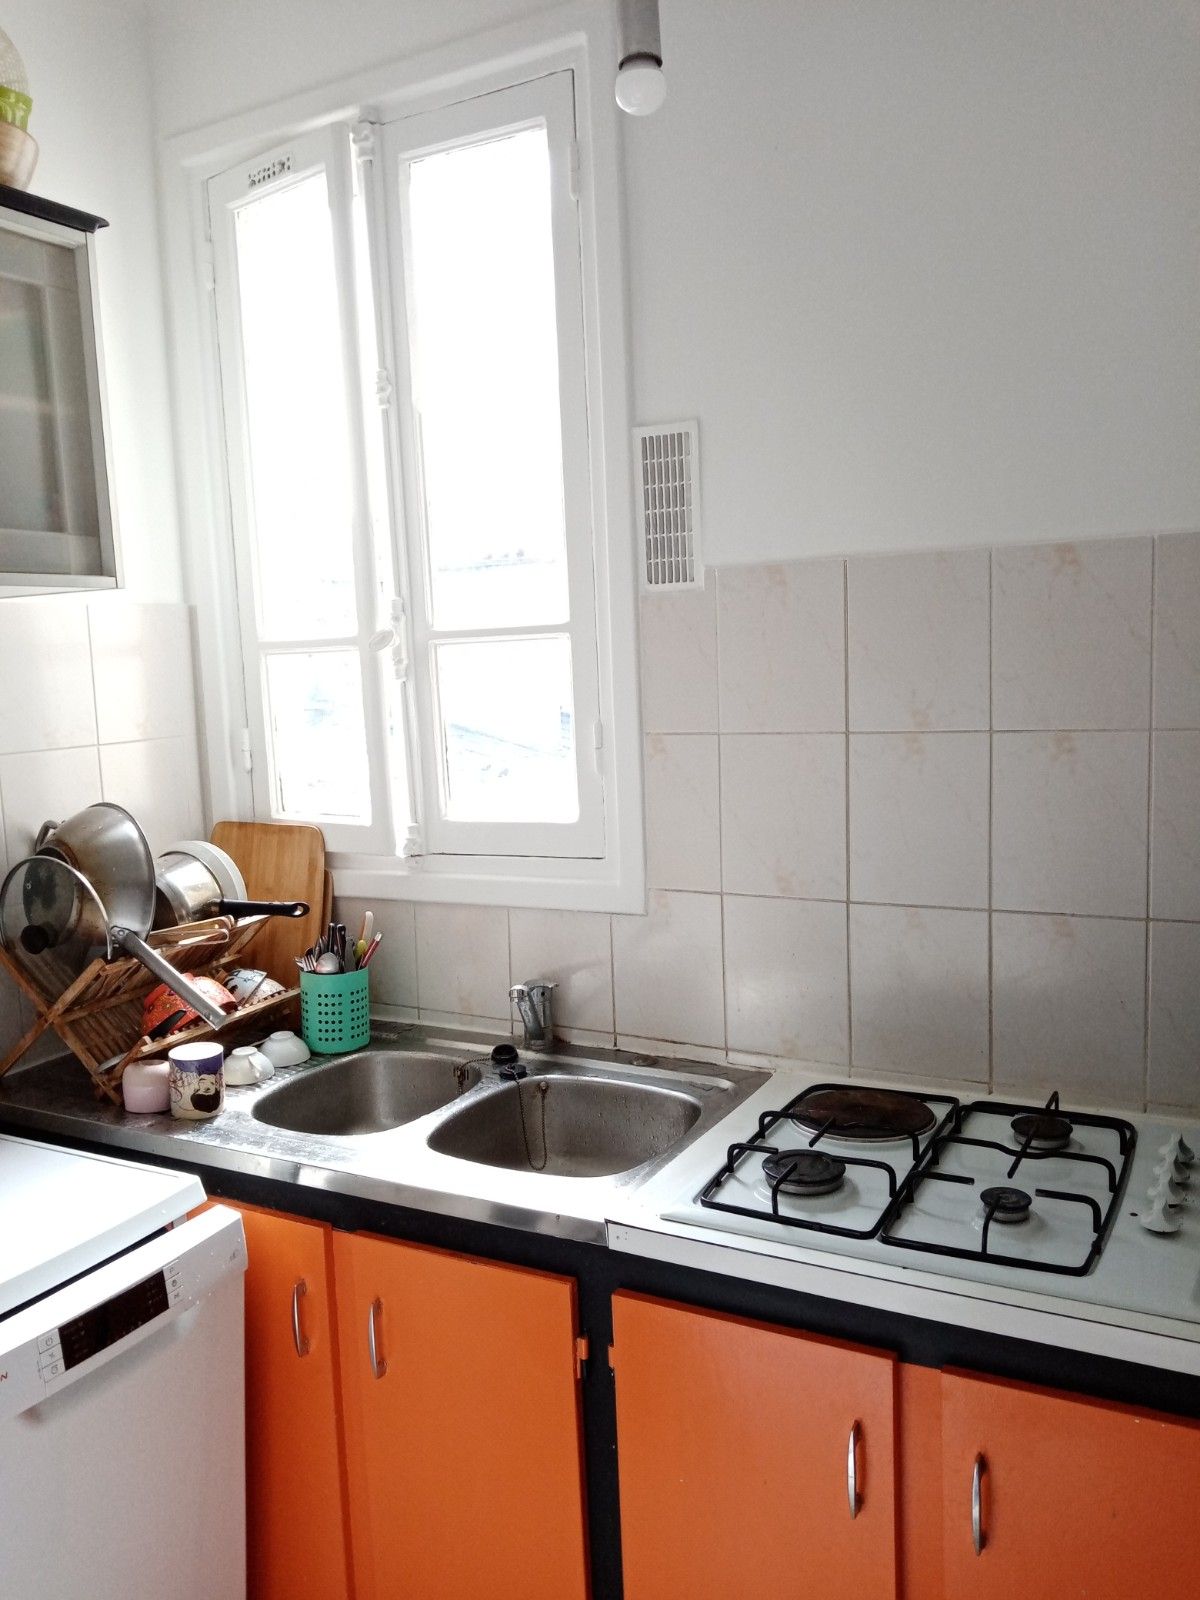 Flat to rent in Montmartre district, Paris 18th